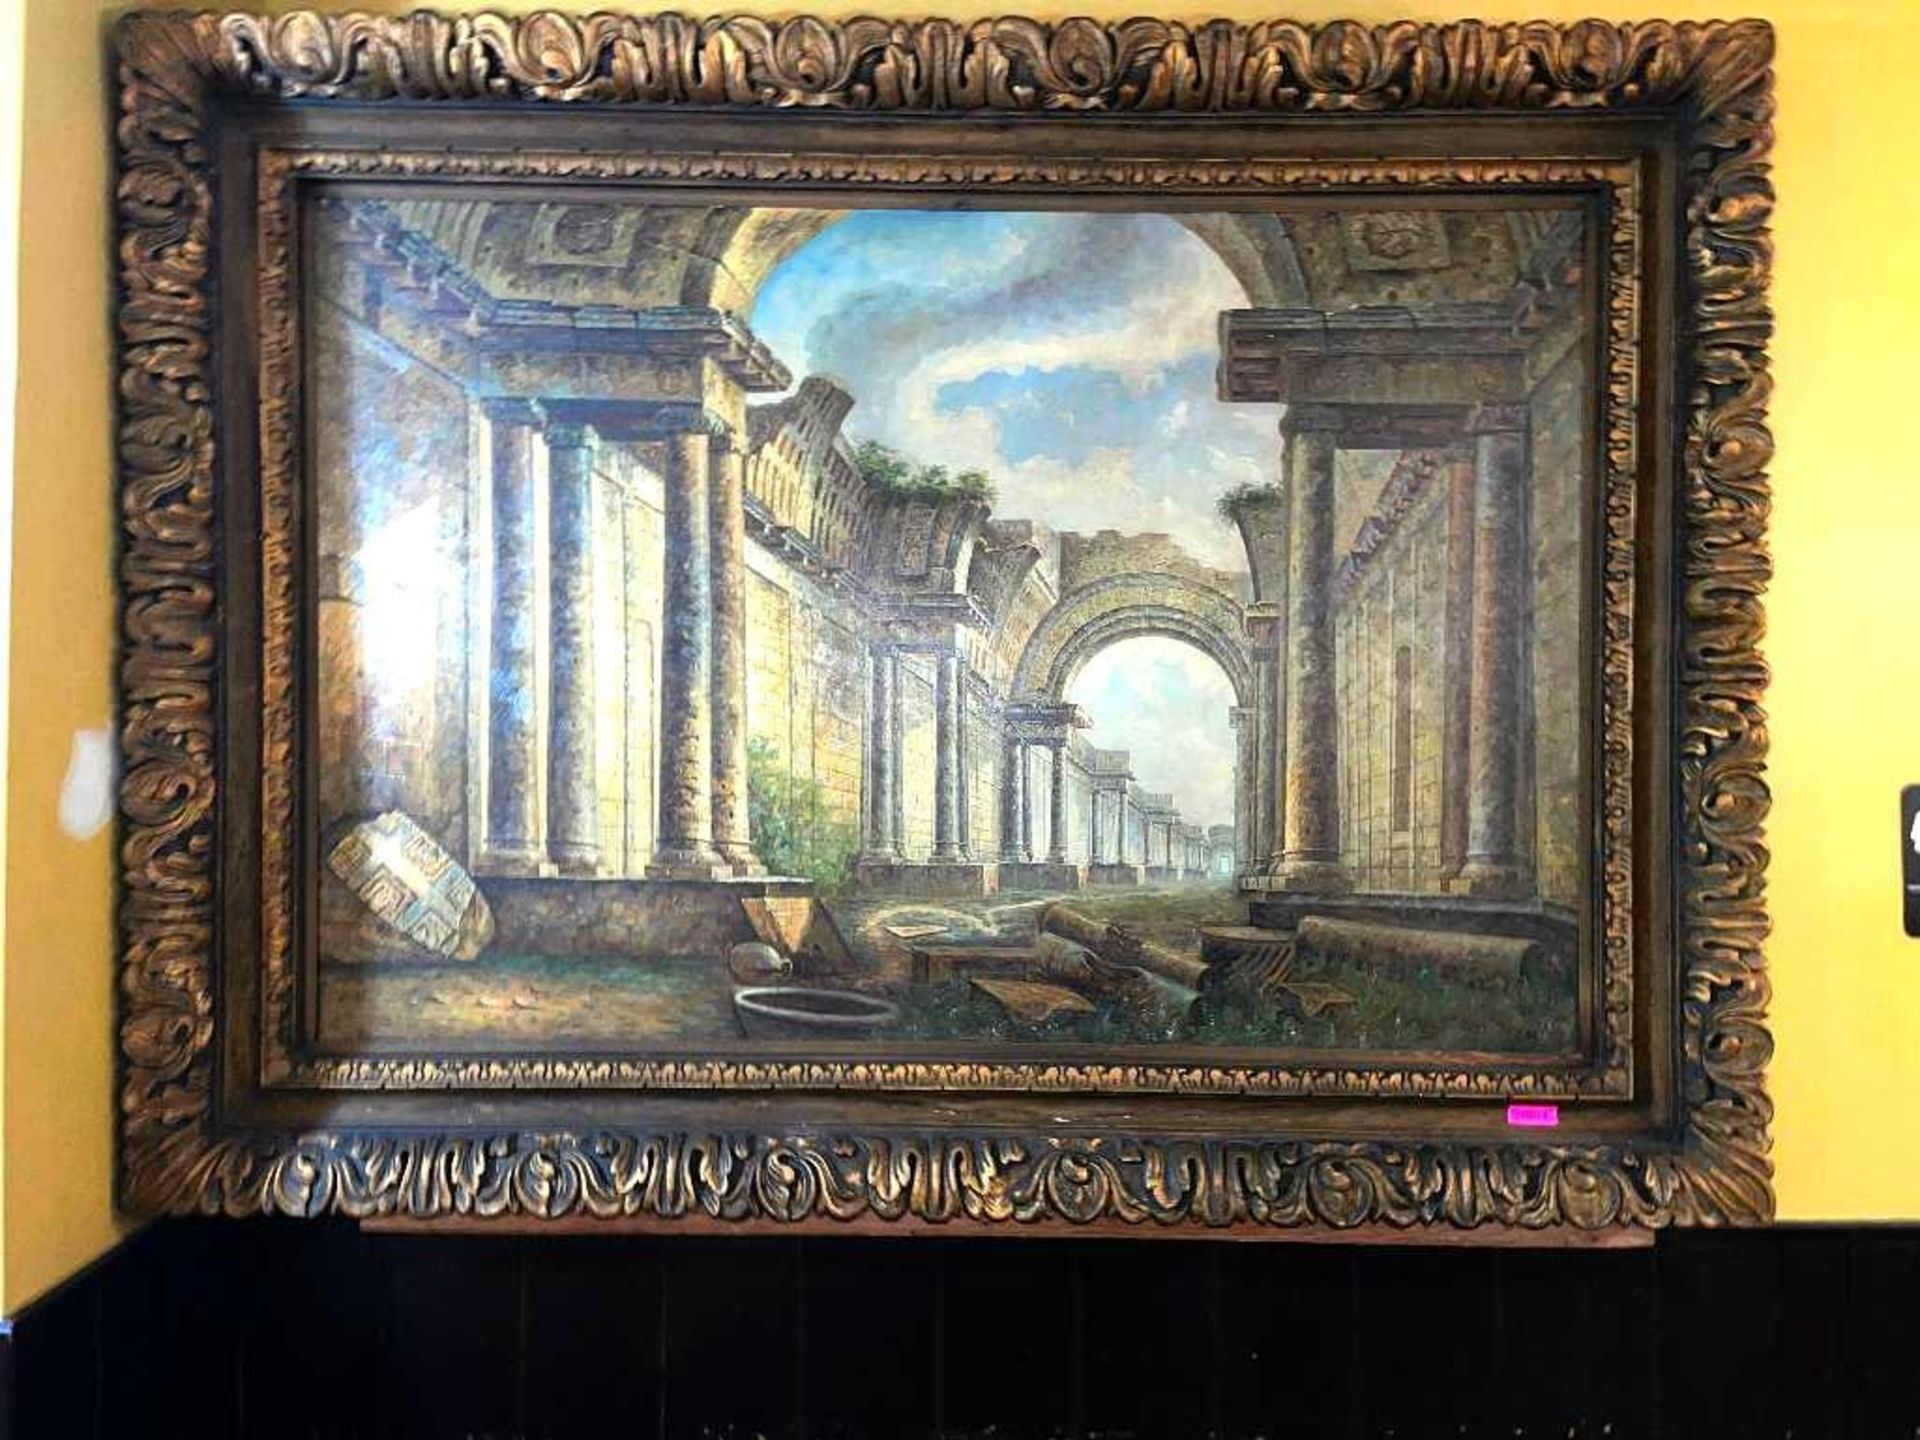 DESCRIPTION: 88" X 63" LARGE FRAMED PAINTING SIZE 88" X 63" LOCATION: SEATING QTY: 1